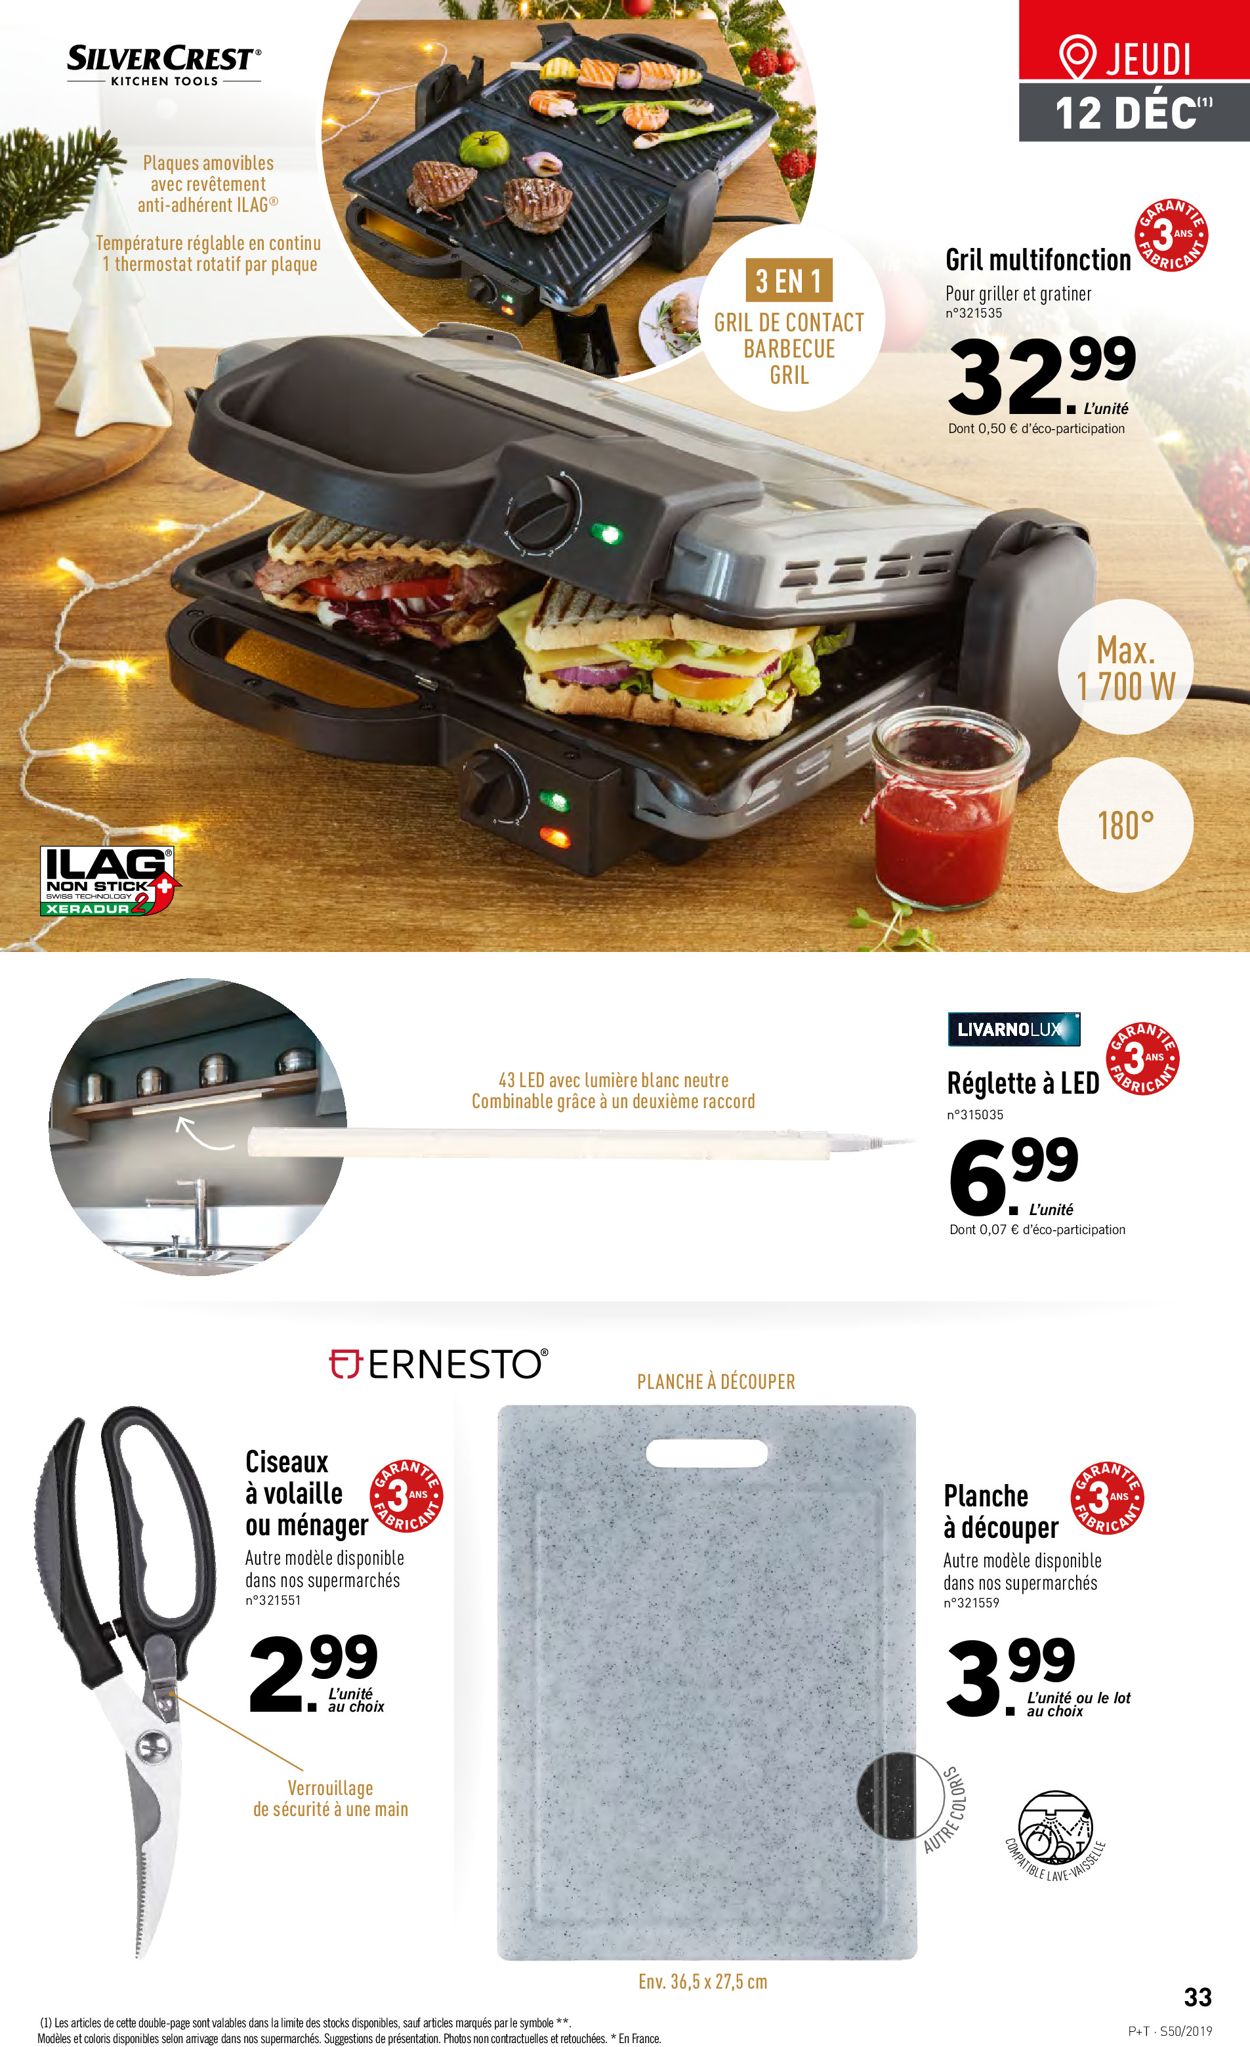 Lidl Catalogue - 11.12-17.12.2019 (Page 33)